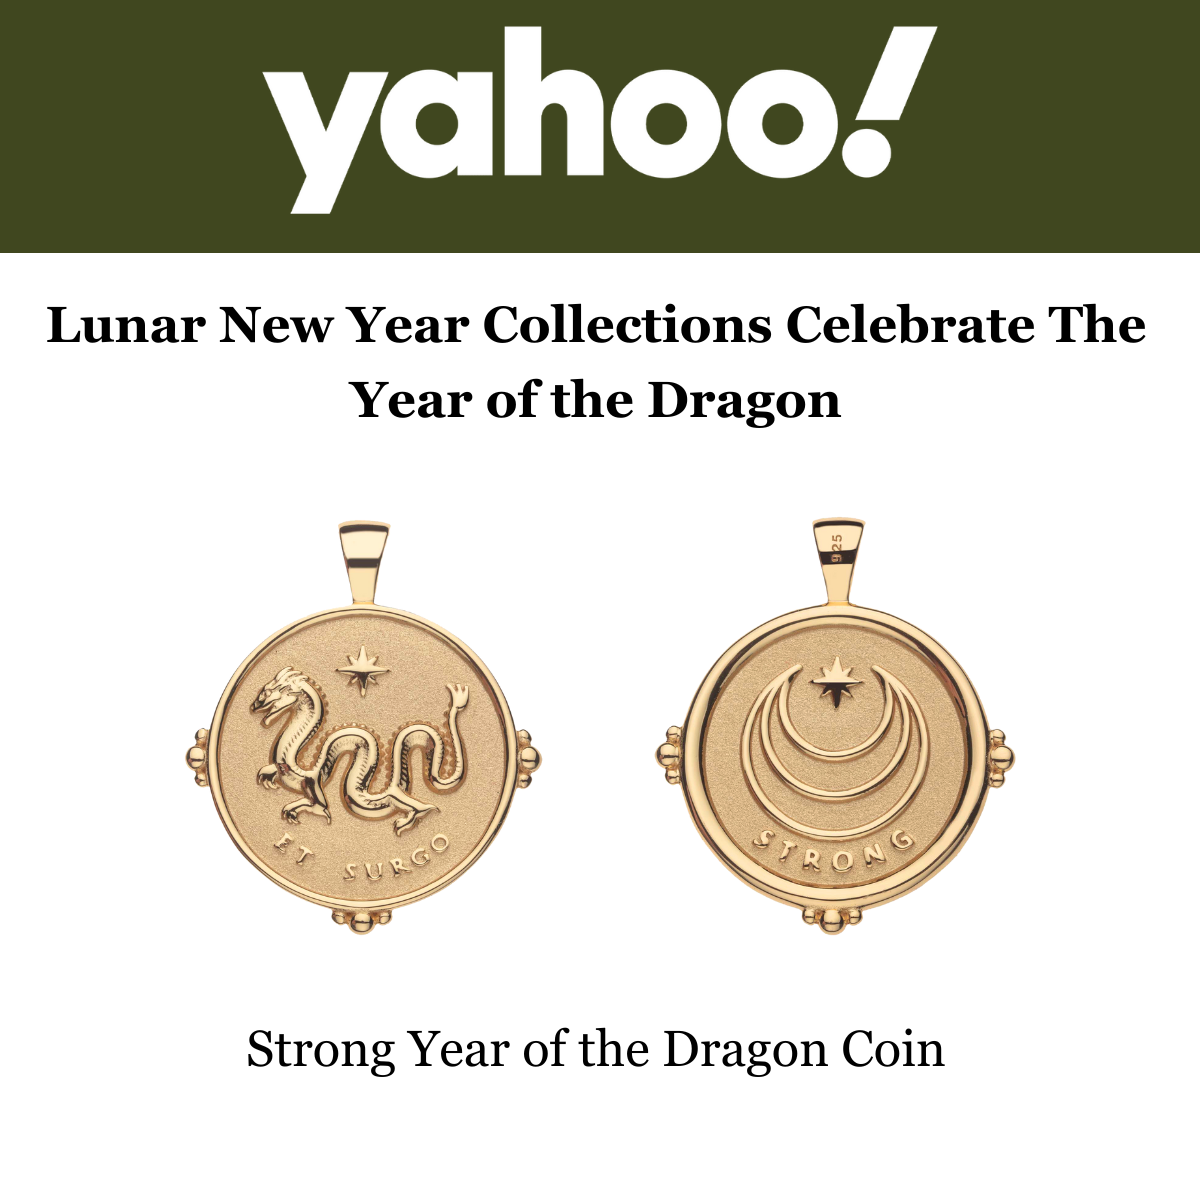 Press Highlight: Yahoo News Celebrates Lunar New Year with Strong Year of the Dragon Coin